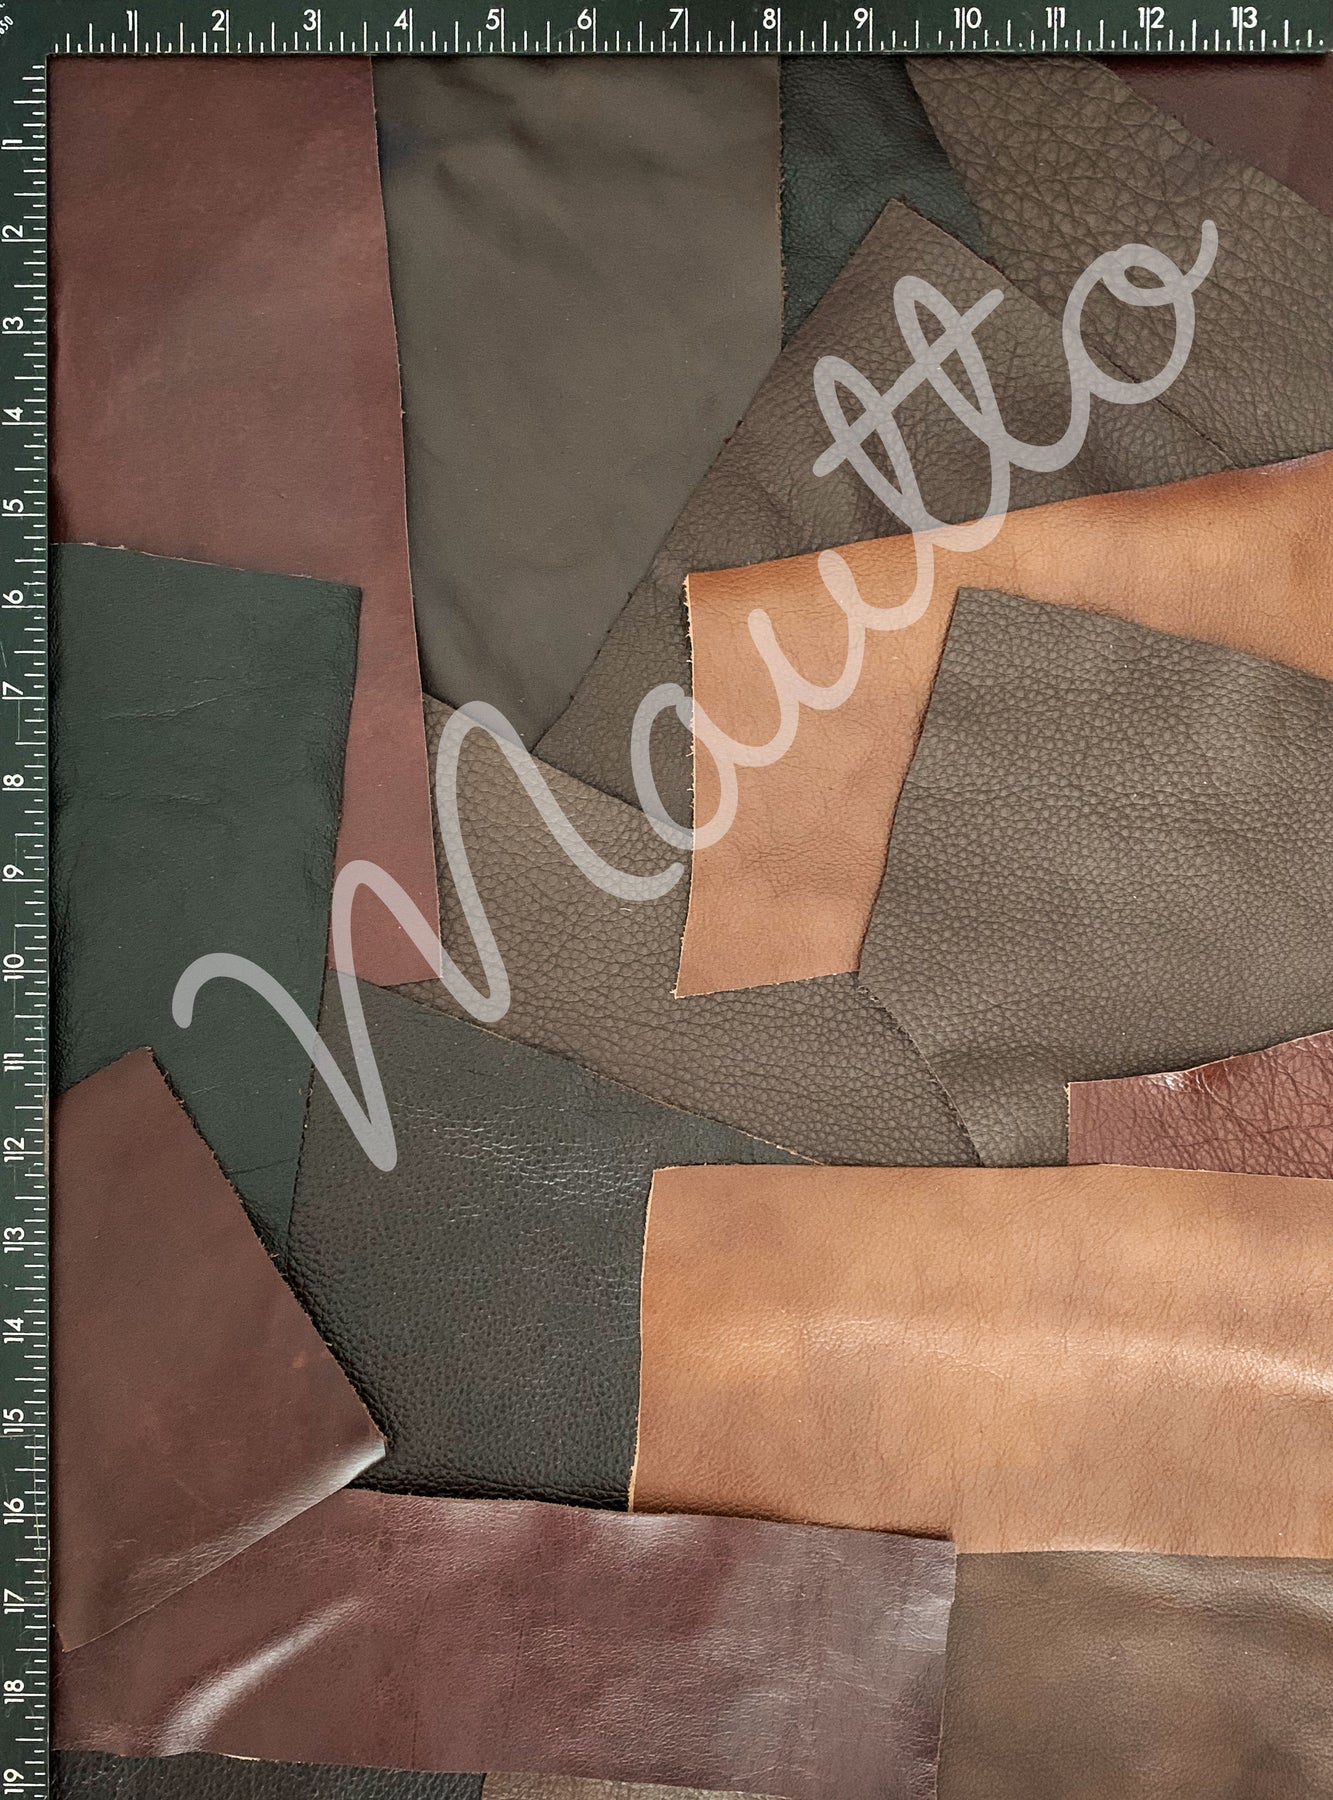 Leather Strips Remnants & Scraps